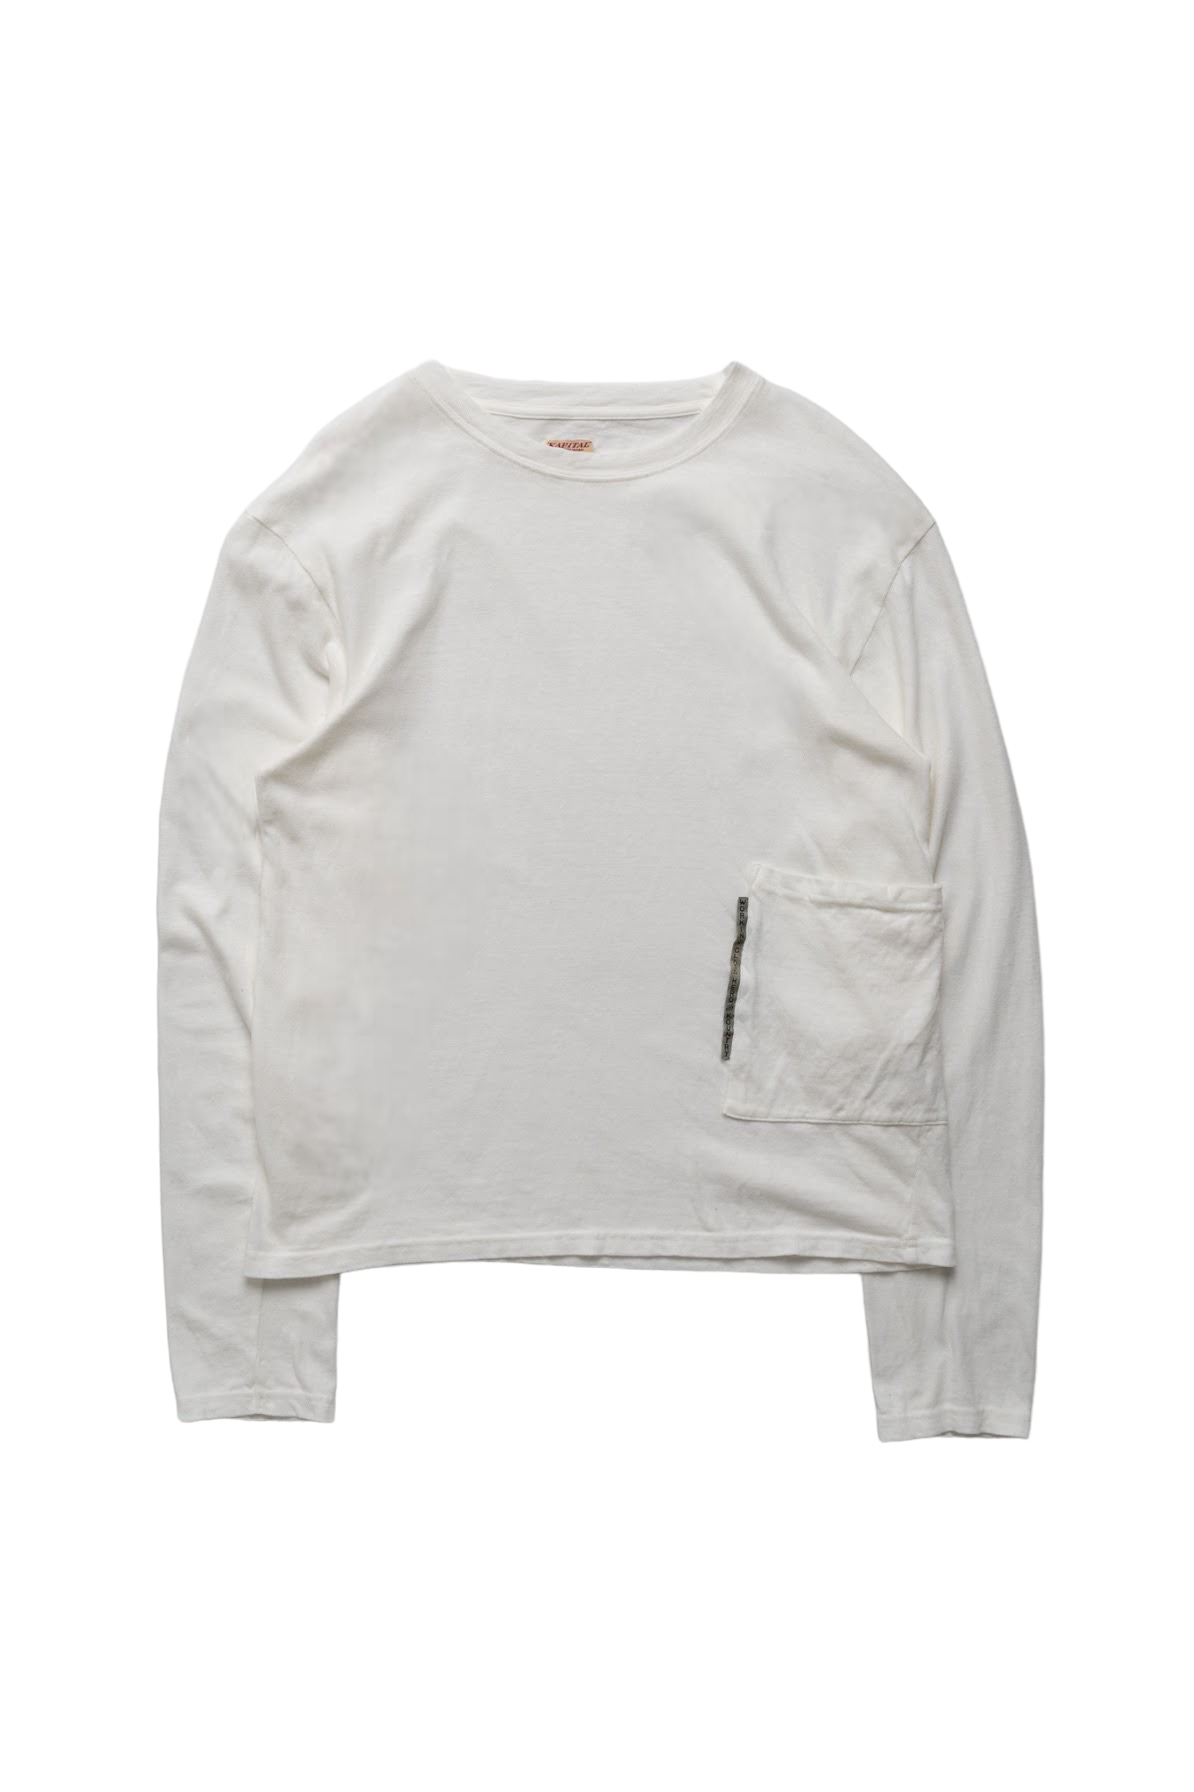 Gauze Jersey BISCUIT Pocket Long Sleeve T - White